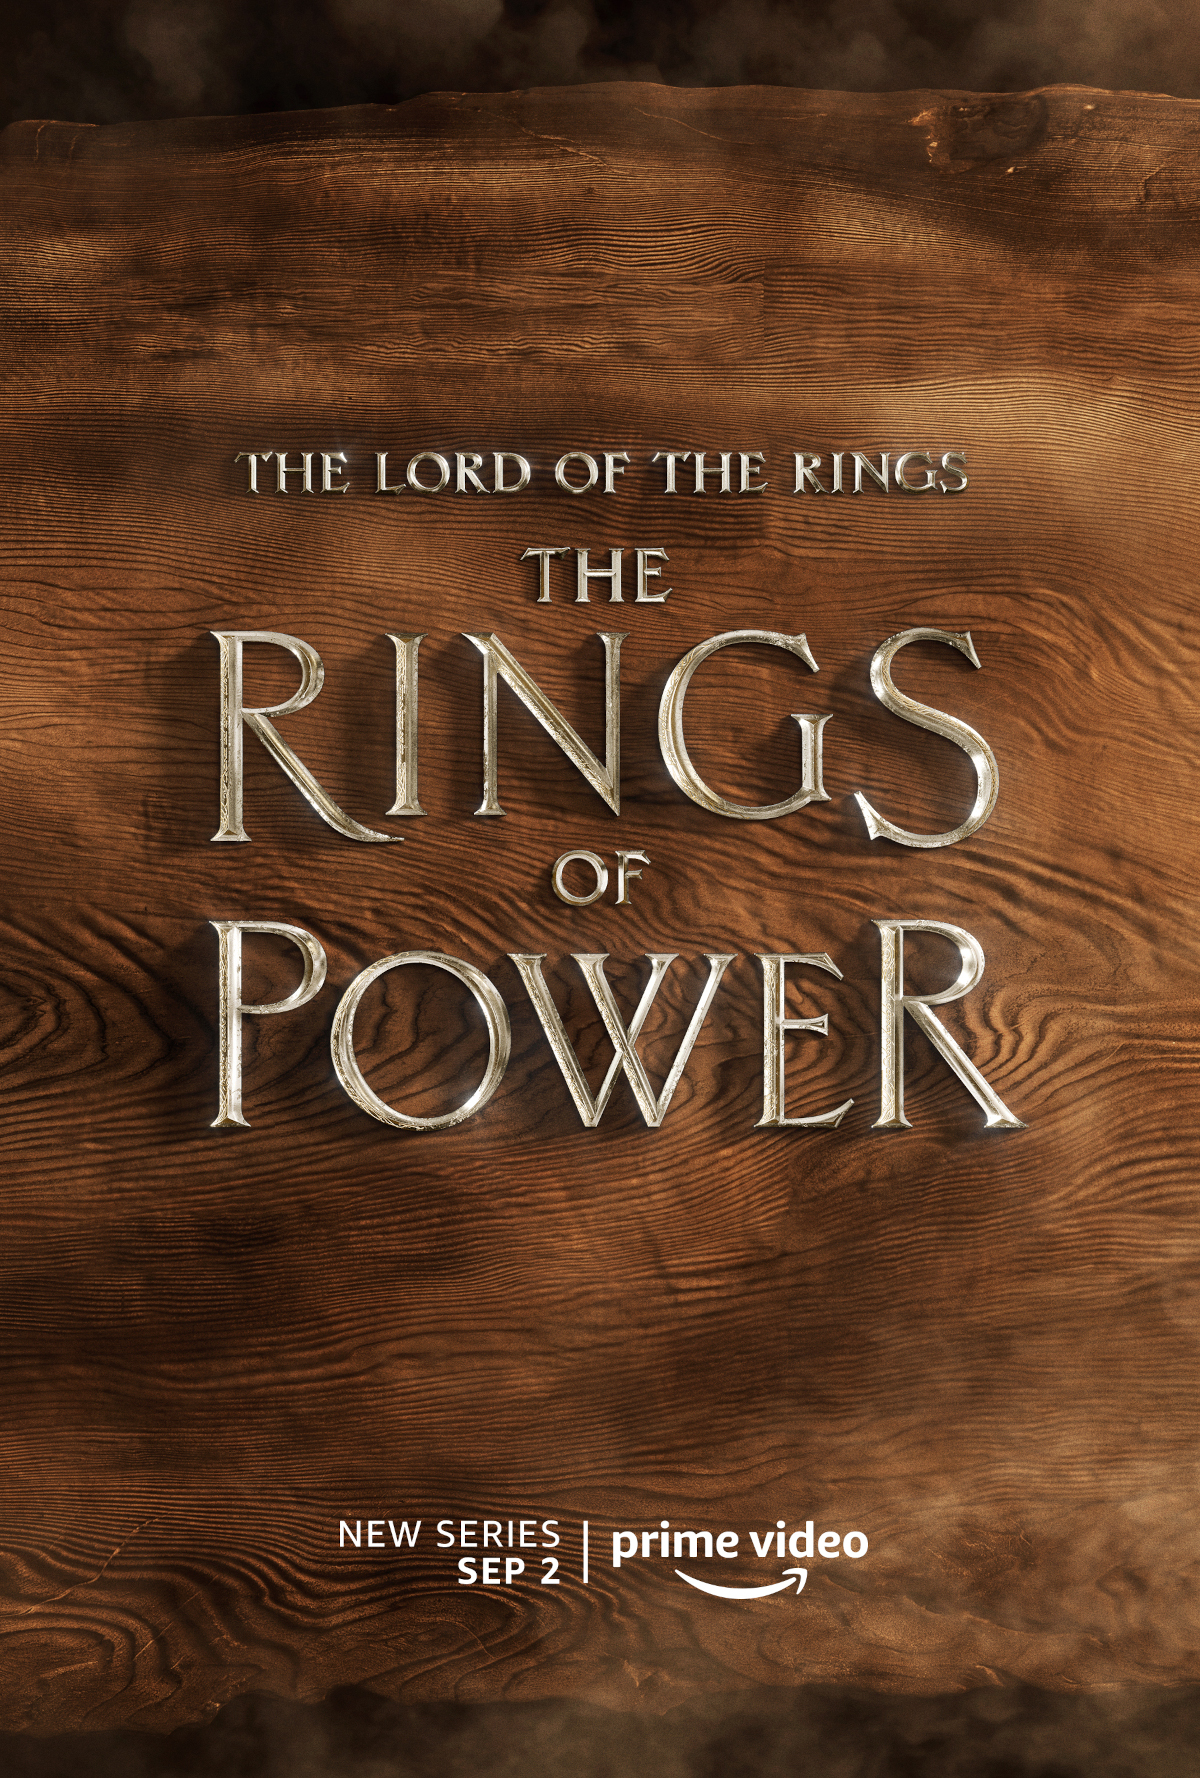 Póster de The Lord of the Rings: The Rings of Power